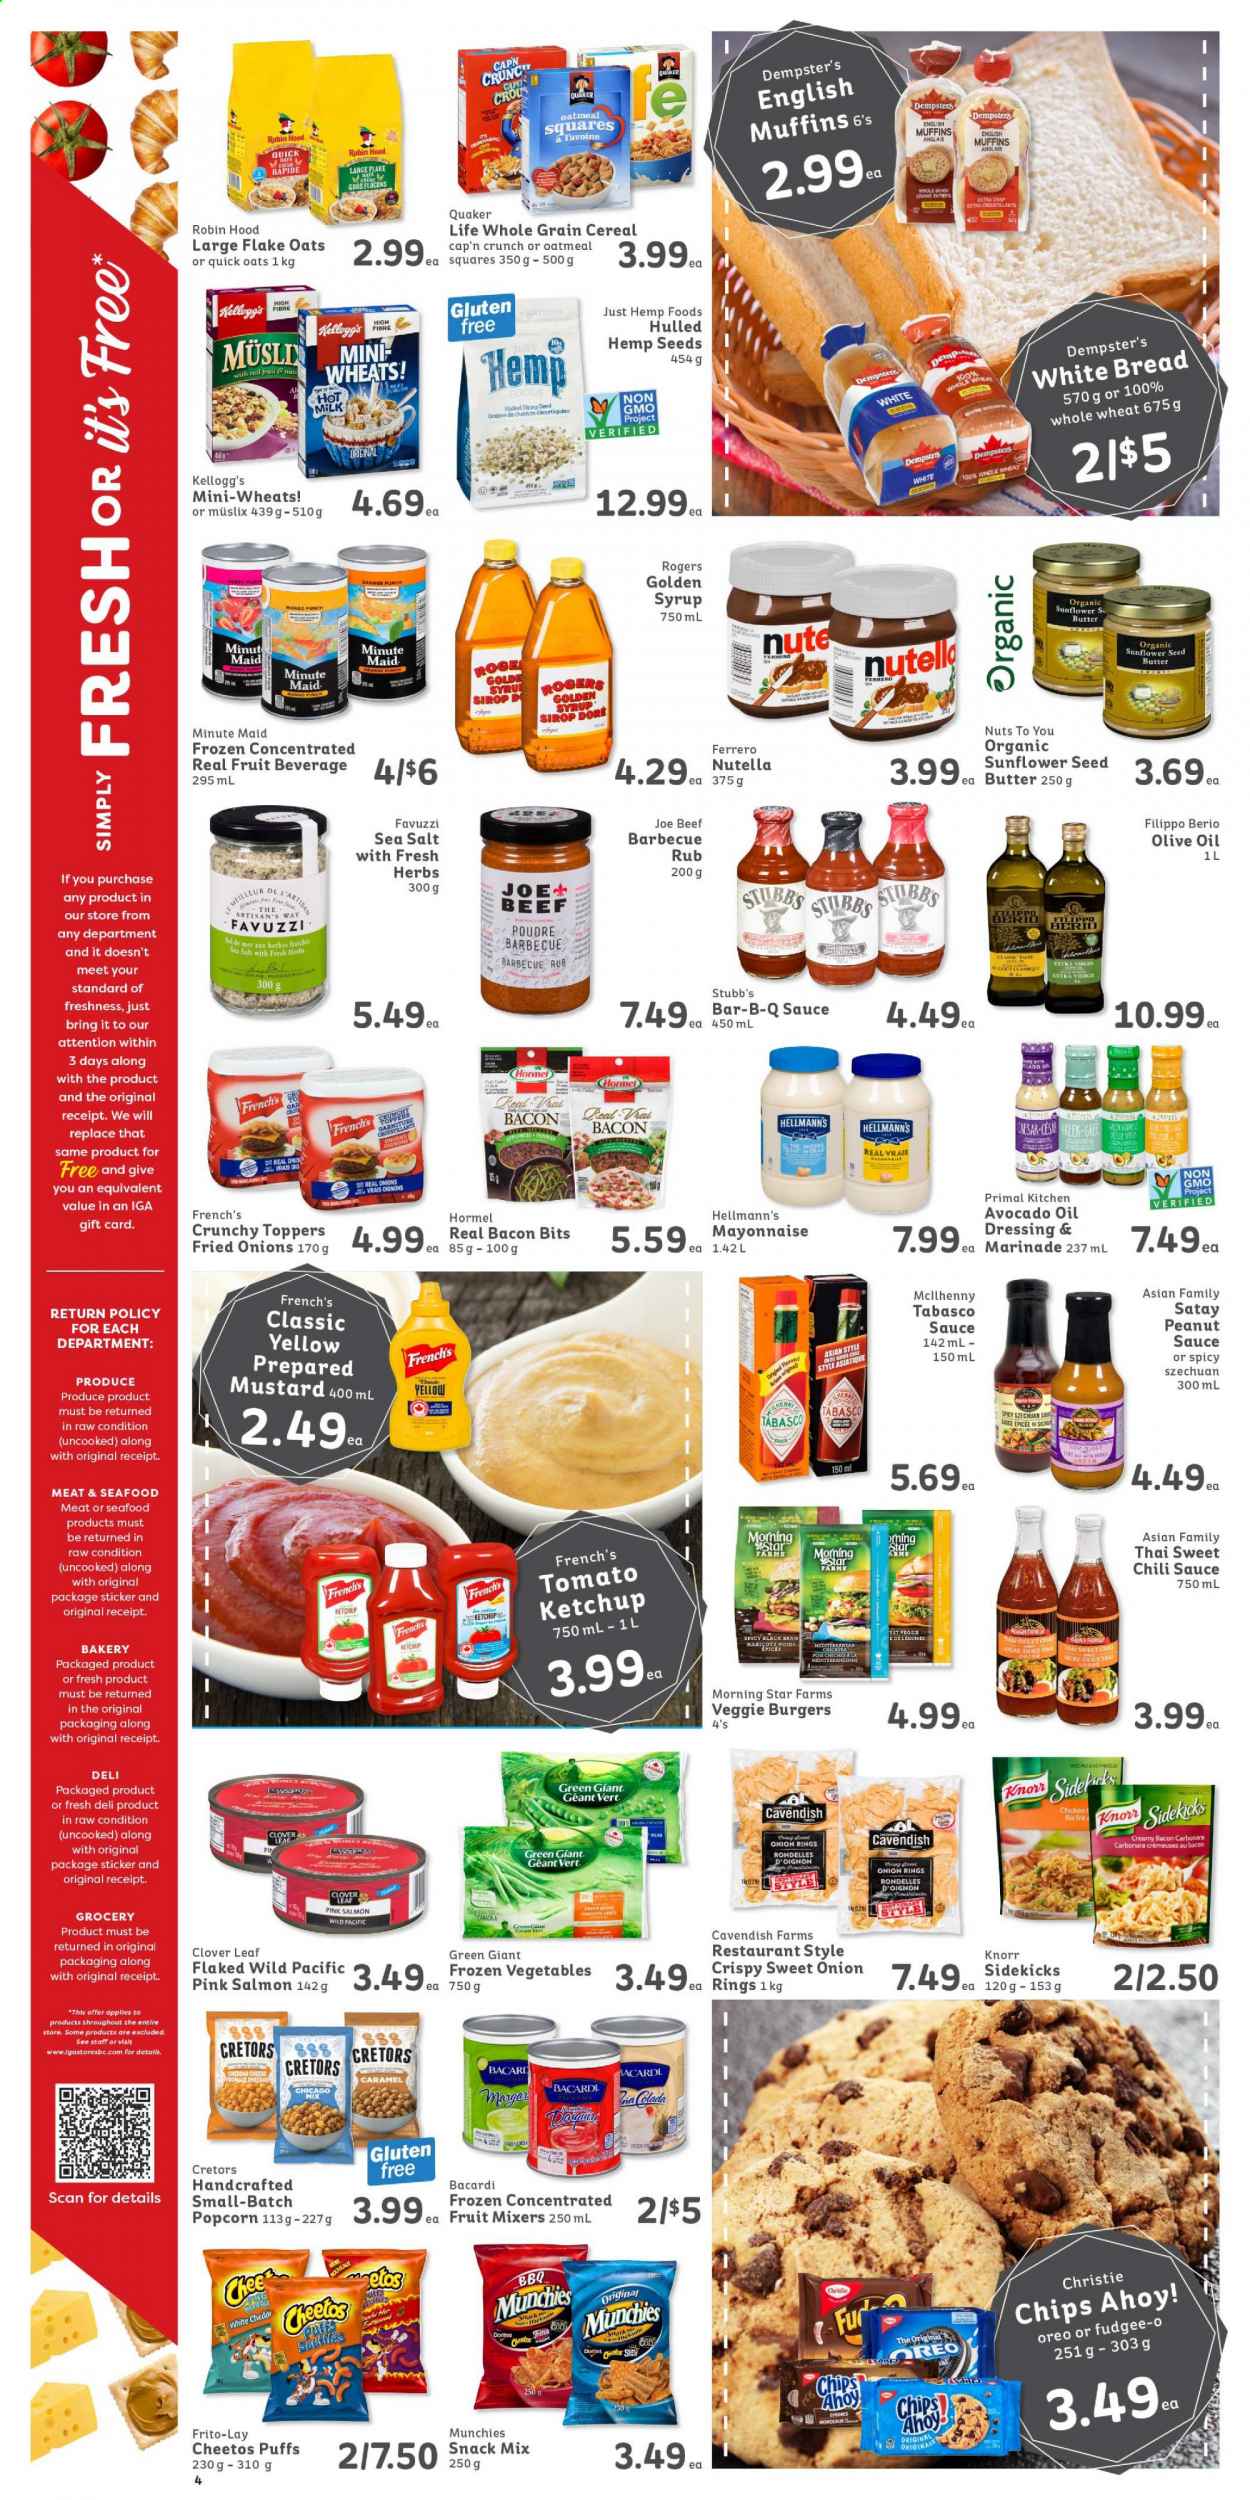 IGA Simple Goodness flyer  - July 23, 2021 - July 29, 2021.